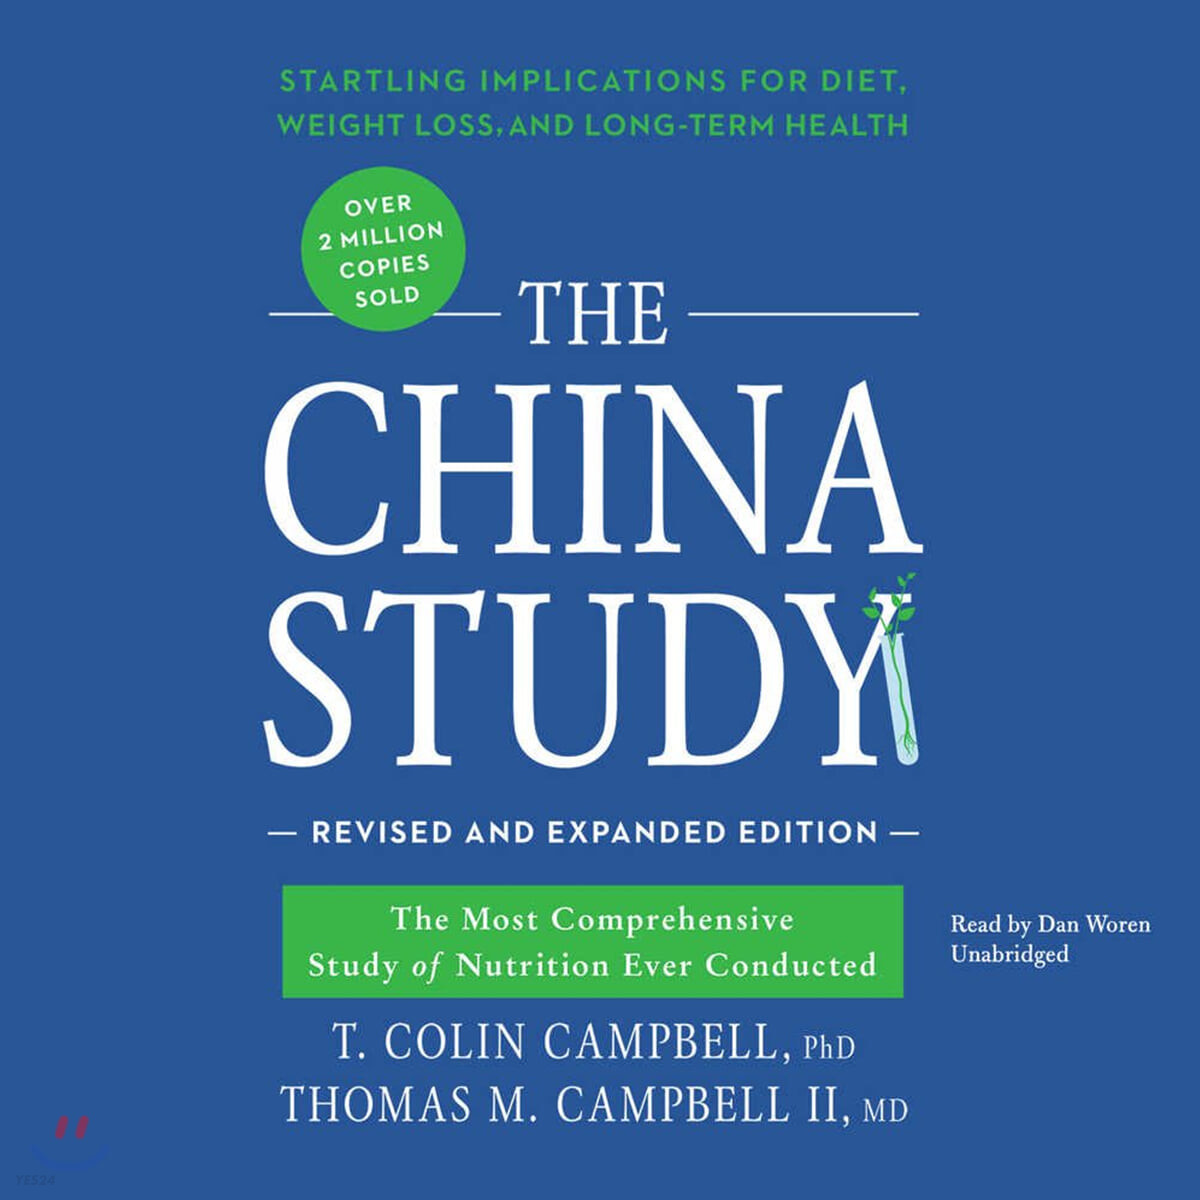 The China Study, Revised and Expanded Edition: The Most Comprehensive Study of Nutrition Ever Conducted and the Startling Implications for Diet, Weigh (The Most Comprehensive Study of Nutrition Ever Conducted: Startling Implications for Diet, Weight Loss, and Long-Term Health)